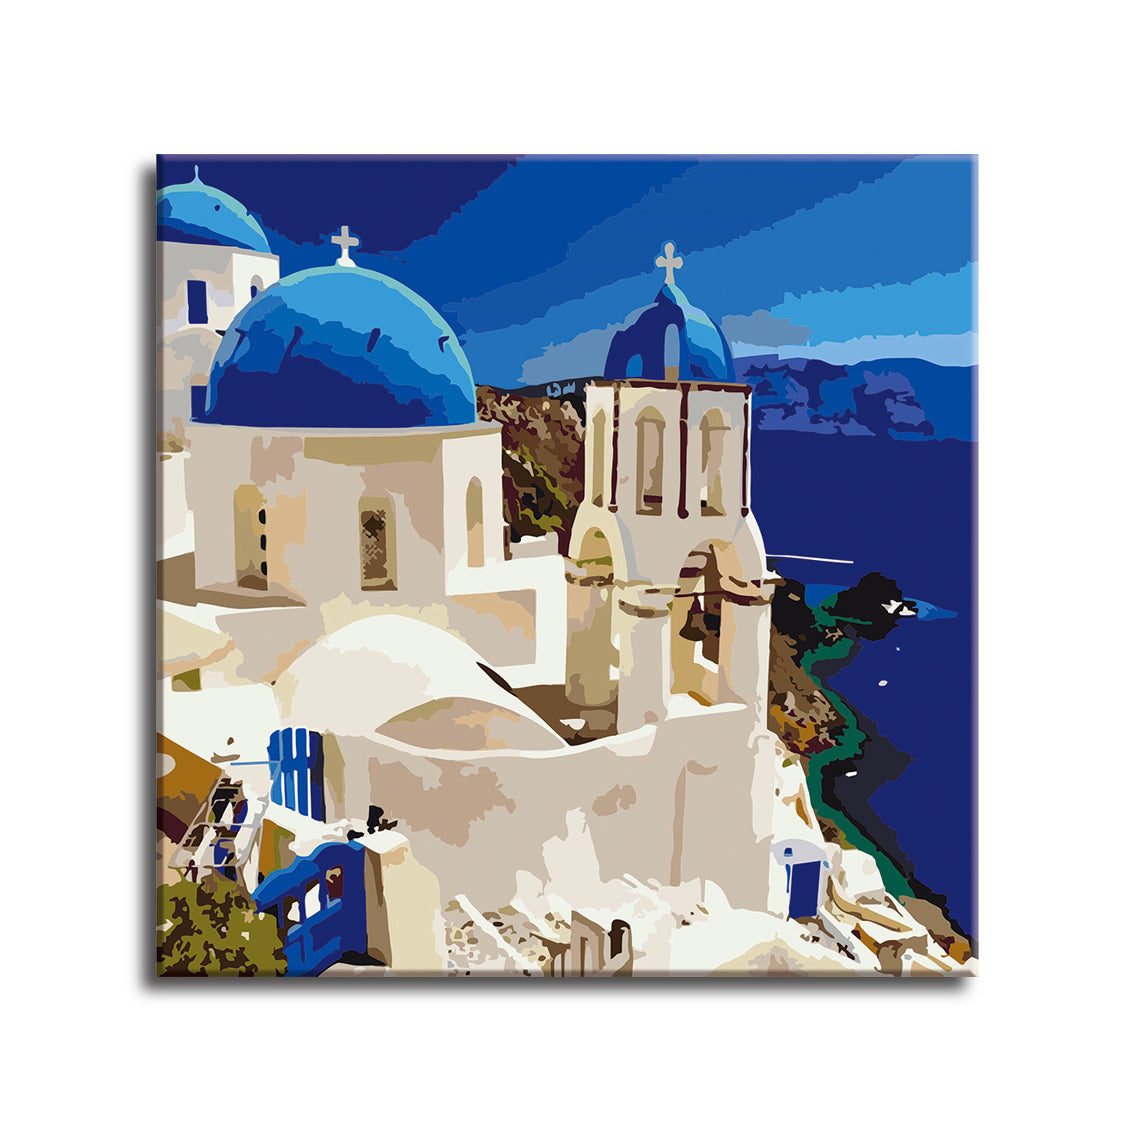 The First Vacation - Paint by Numbers Kit for Adults DIY Oil Painting Kit on Canvas